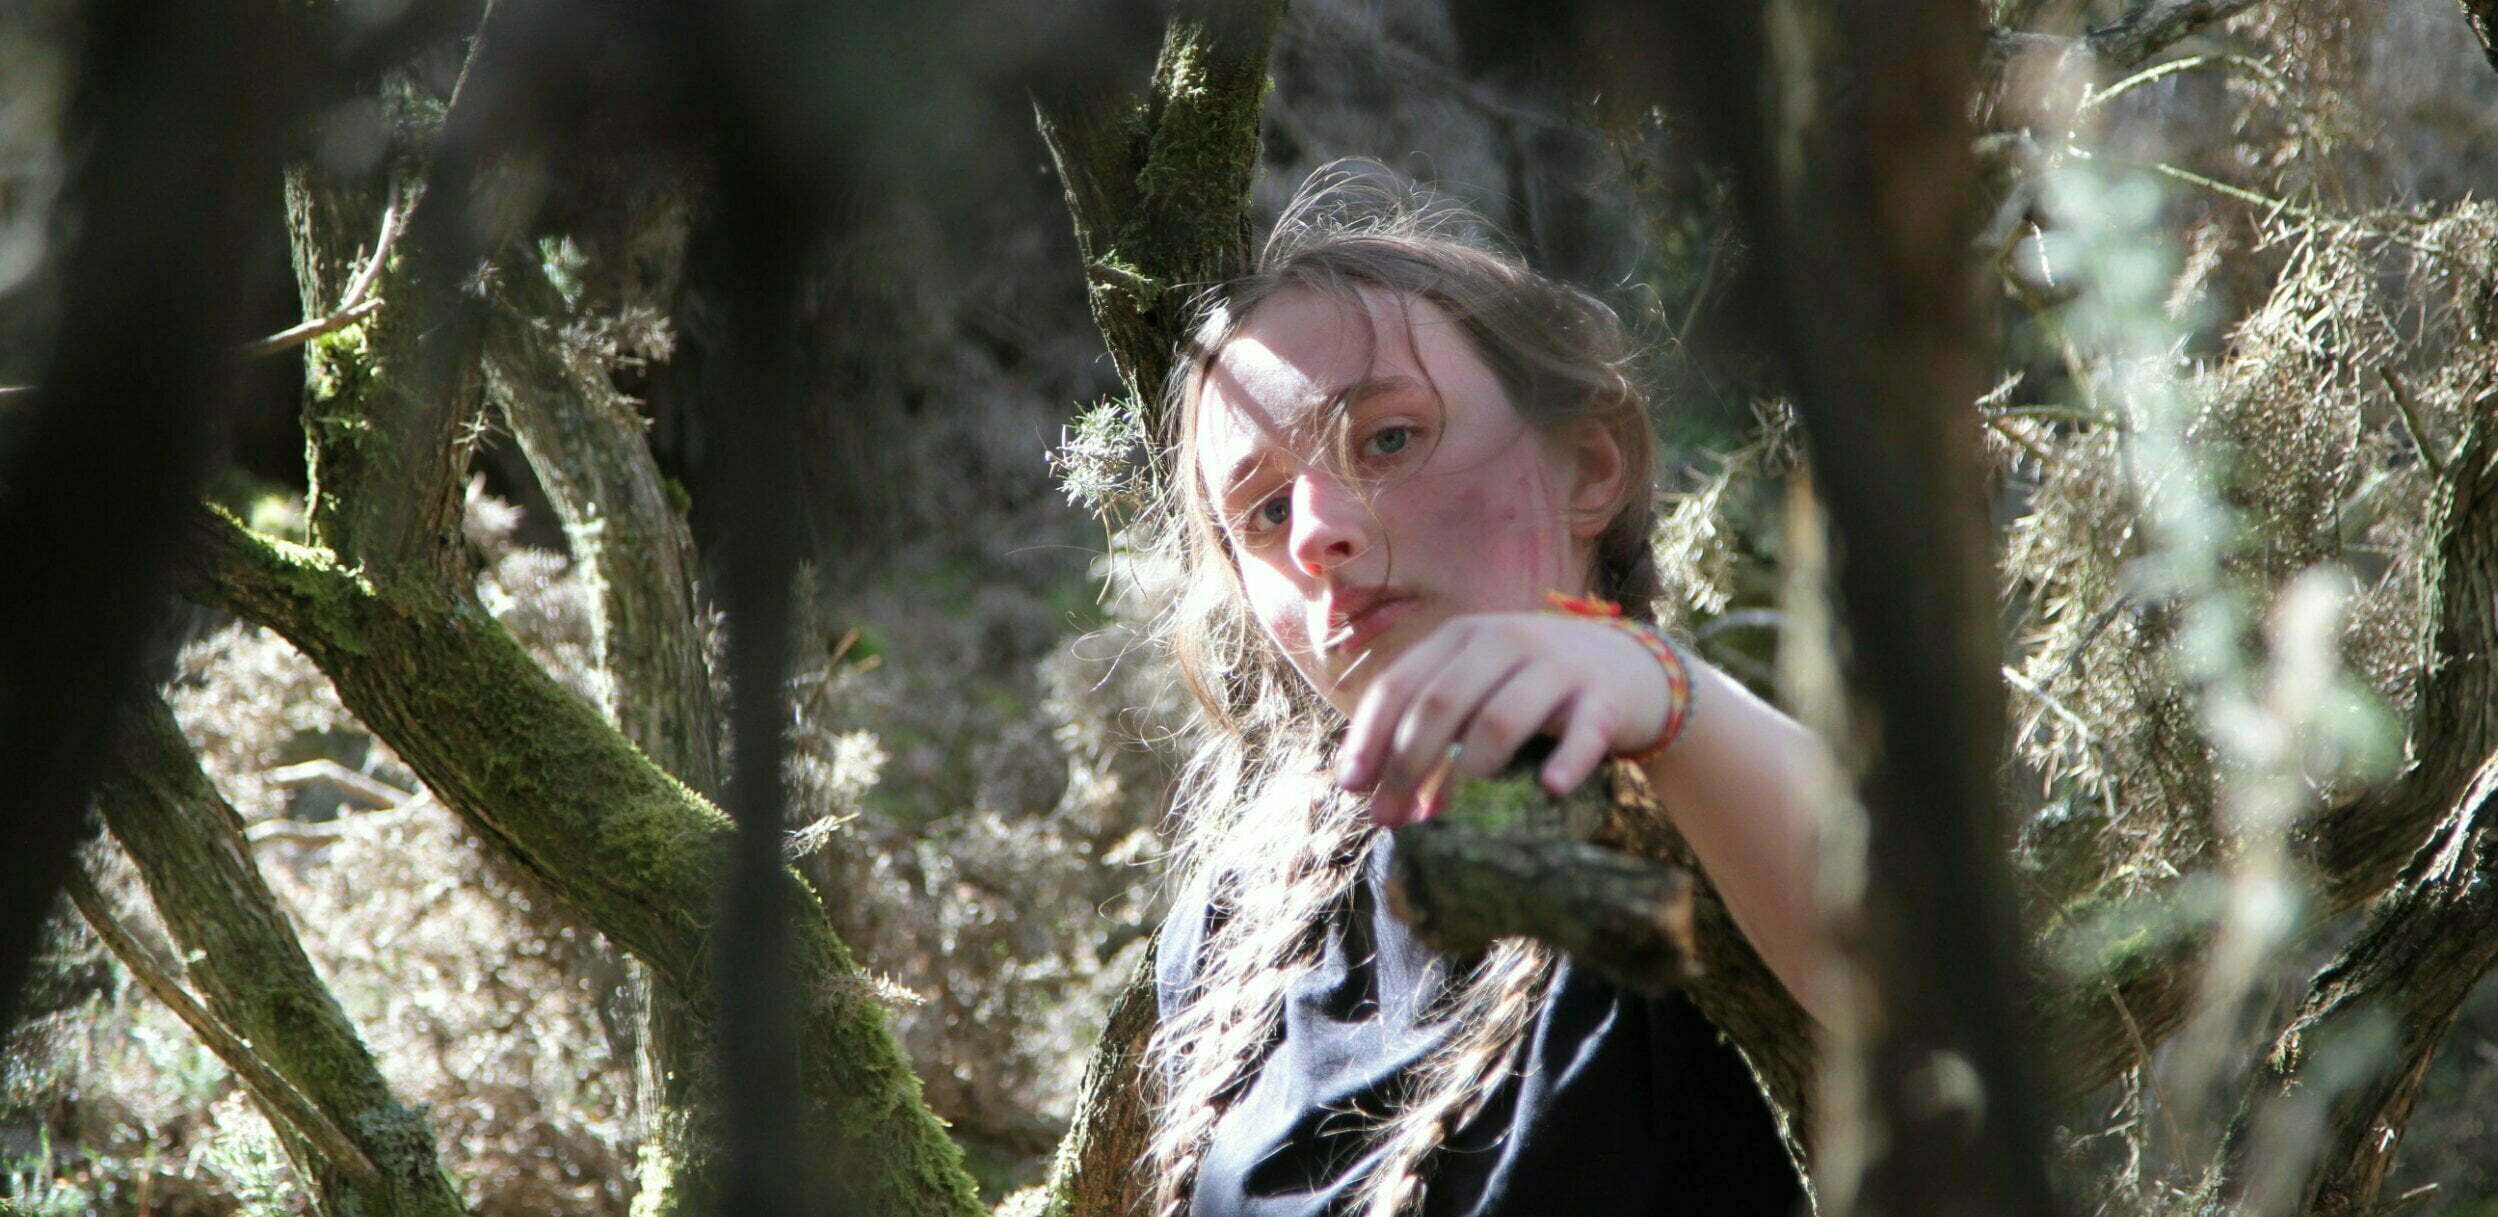 A young dancer in a black t-shirt stands in the woods amid gnarled trees and reaches toward the camera